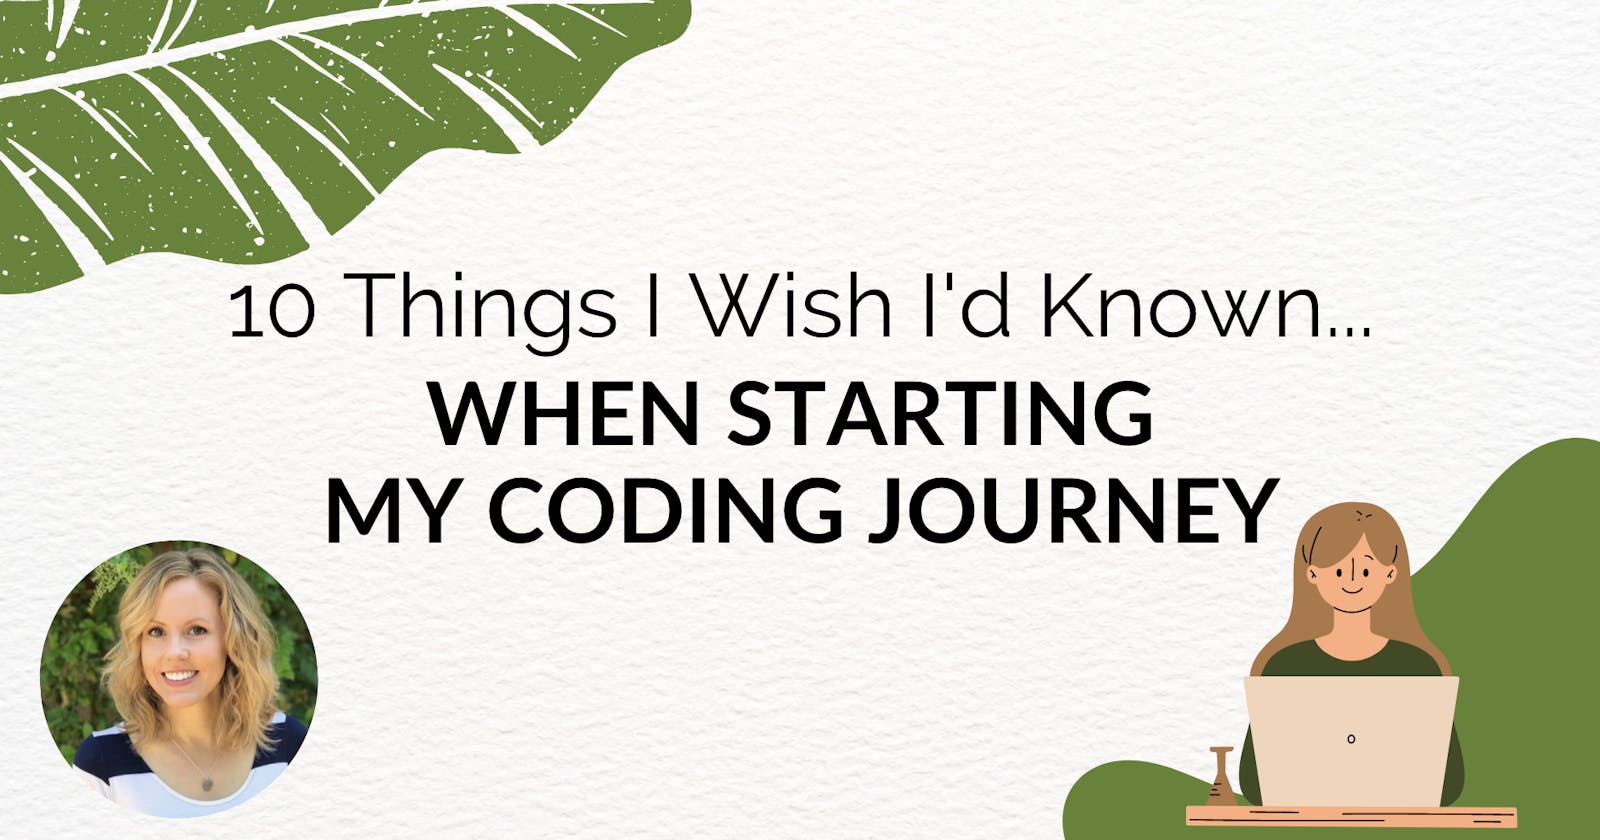 10 Things I Wish I'd Known When Starting My Coding Journey 🤔